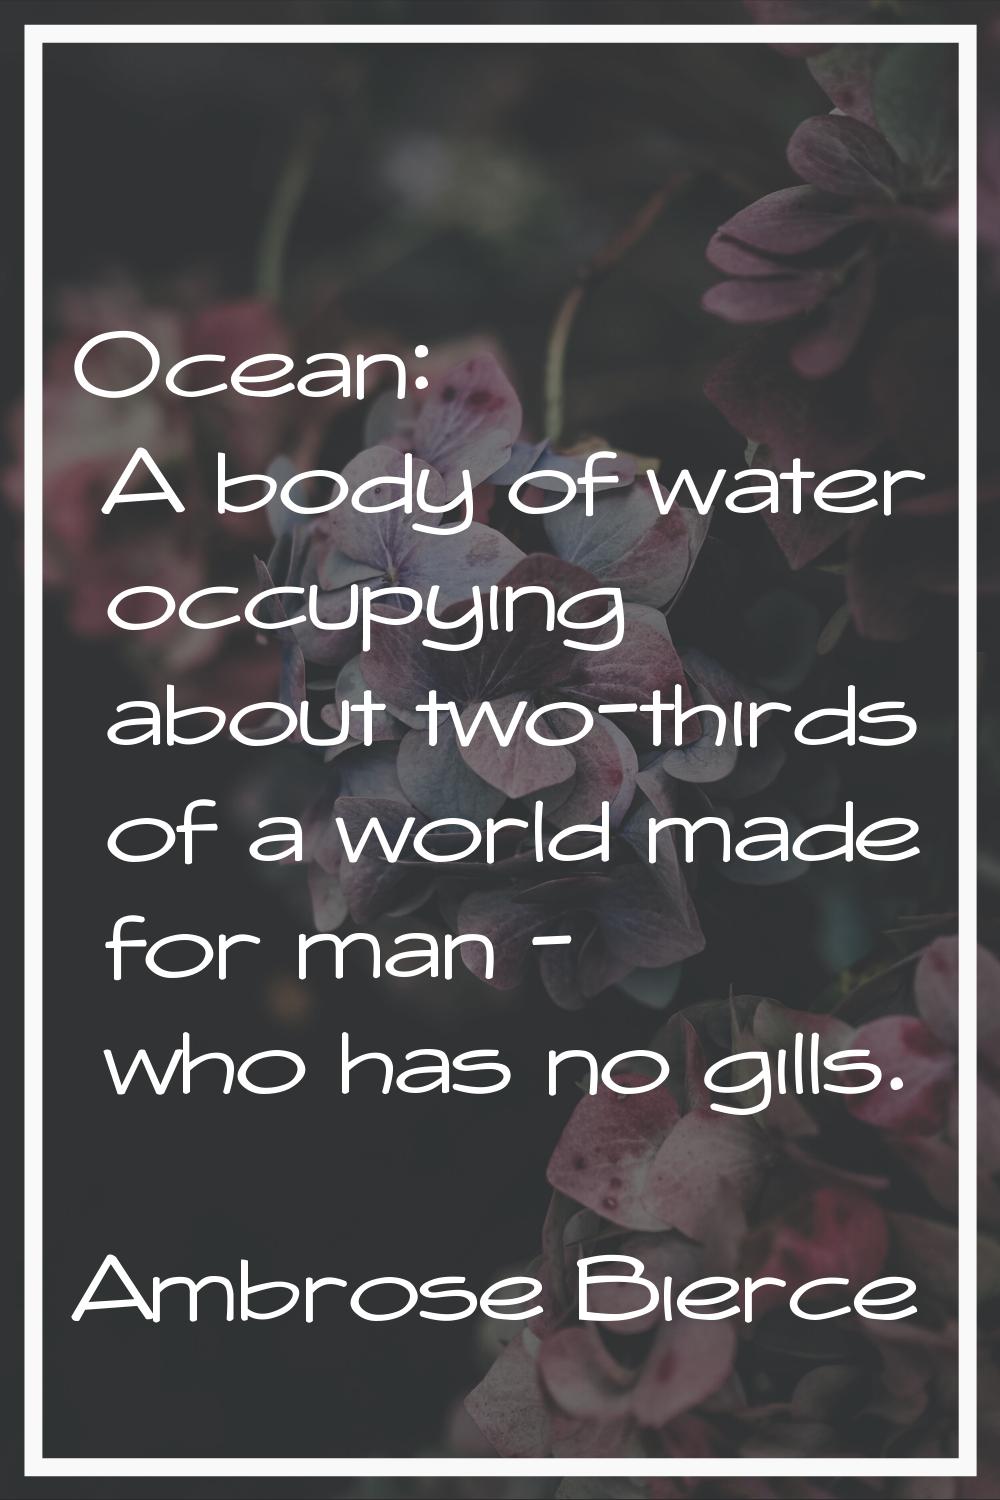 Ocean: A body of water occupying about two-thirds of a world made for man - who has no gills.